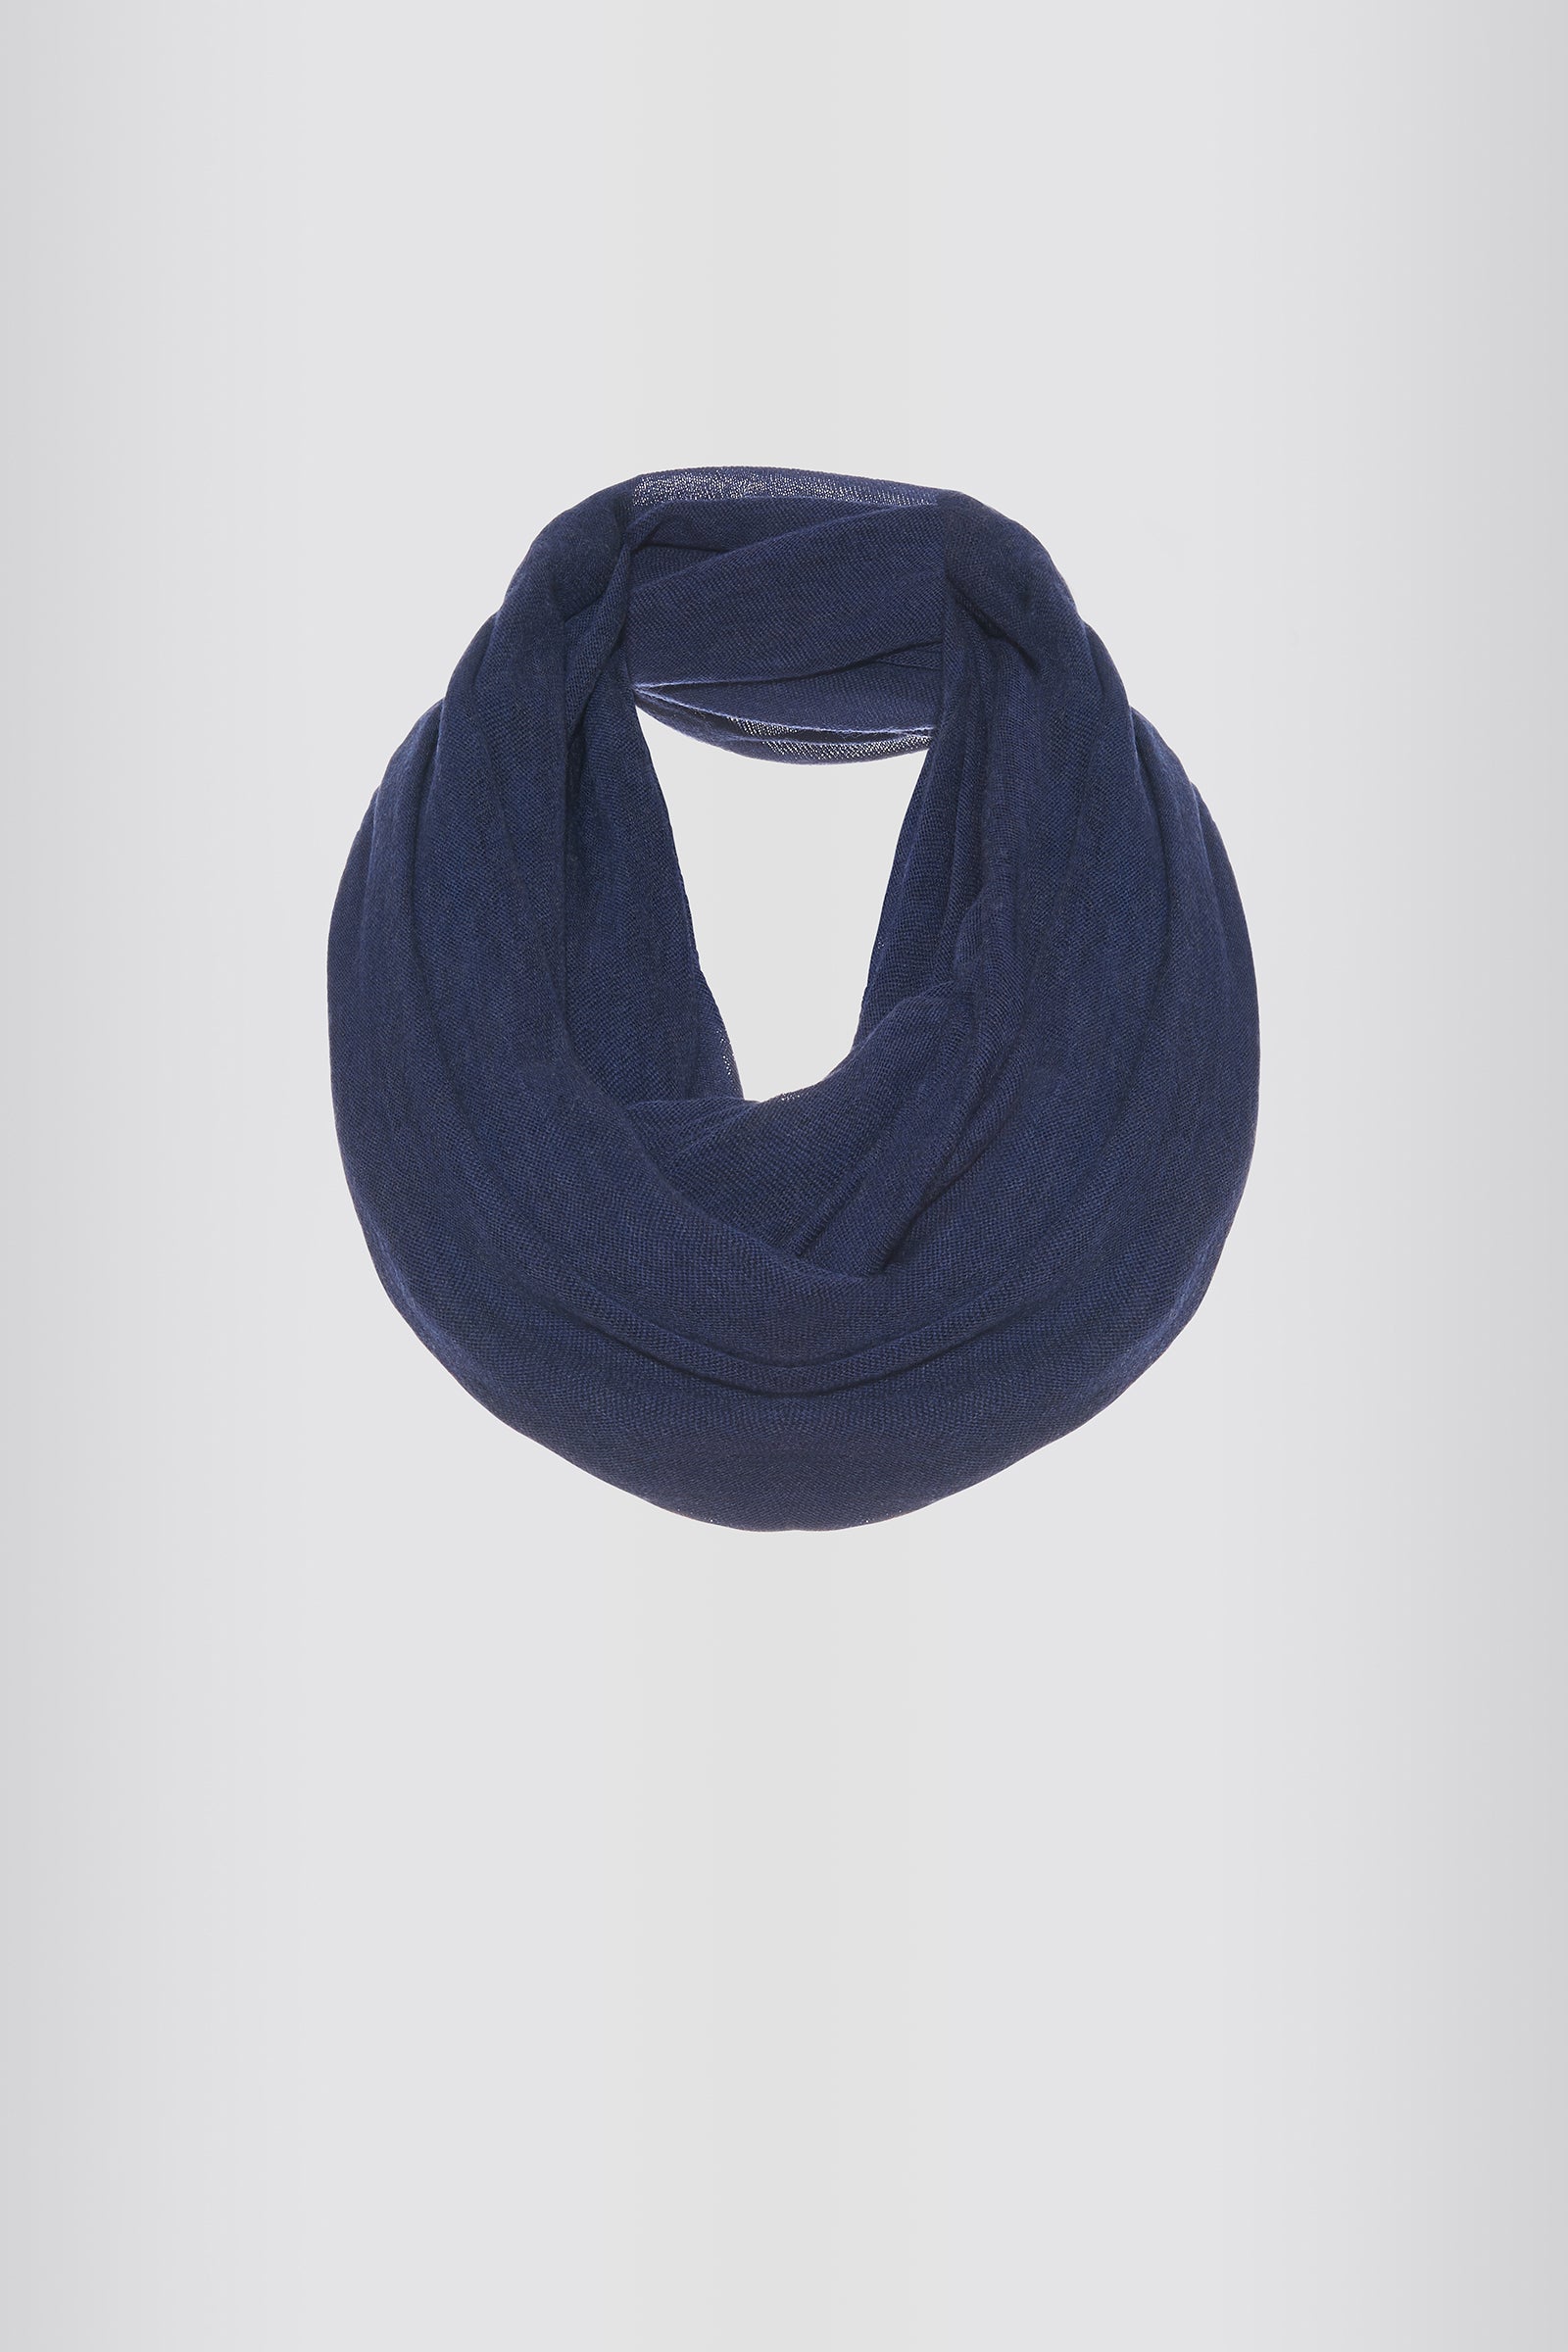 Kal Rieman Infinity Circle Scarf in Navy on Model Front Full View Tied